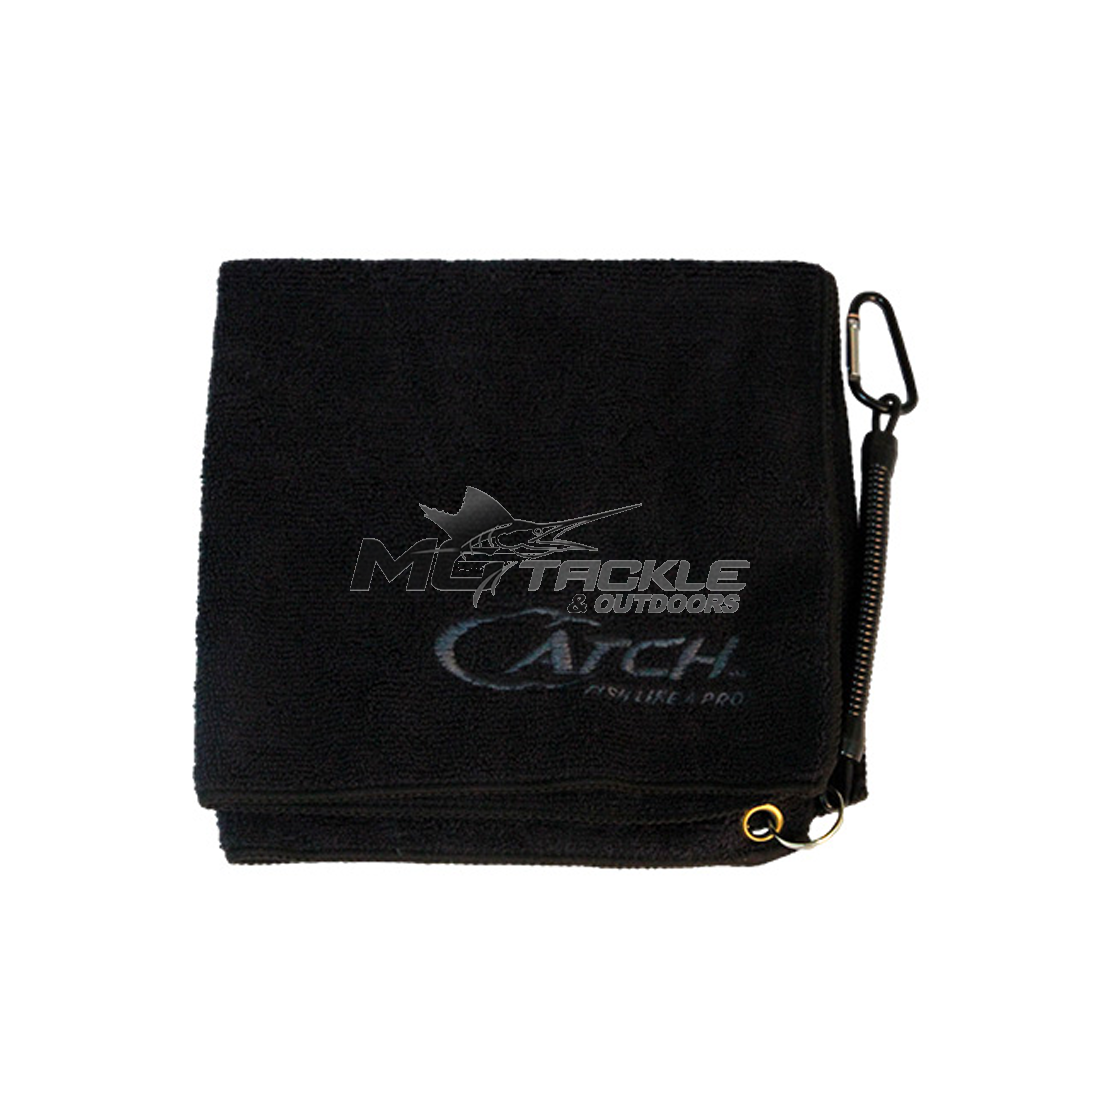 Catch Fishing Towel  MoTackle & Outdoors